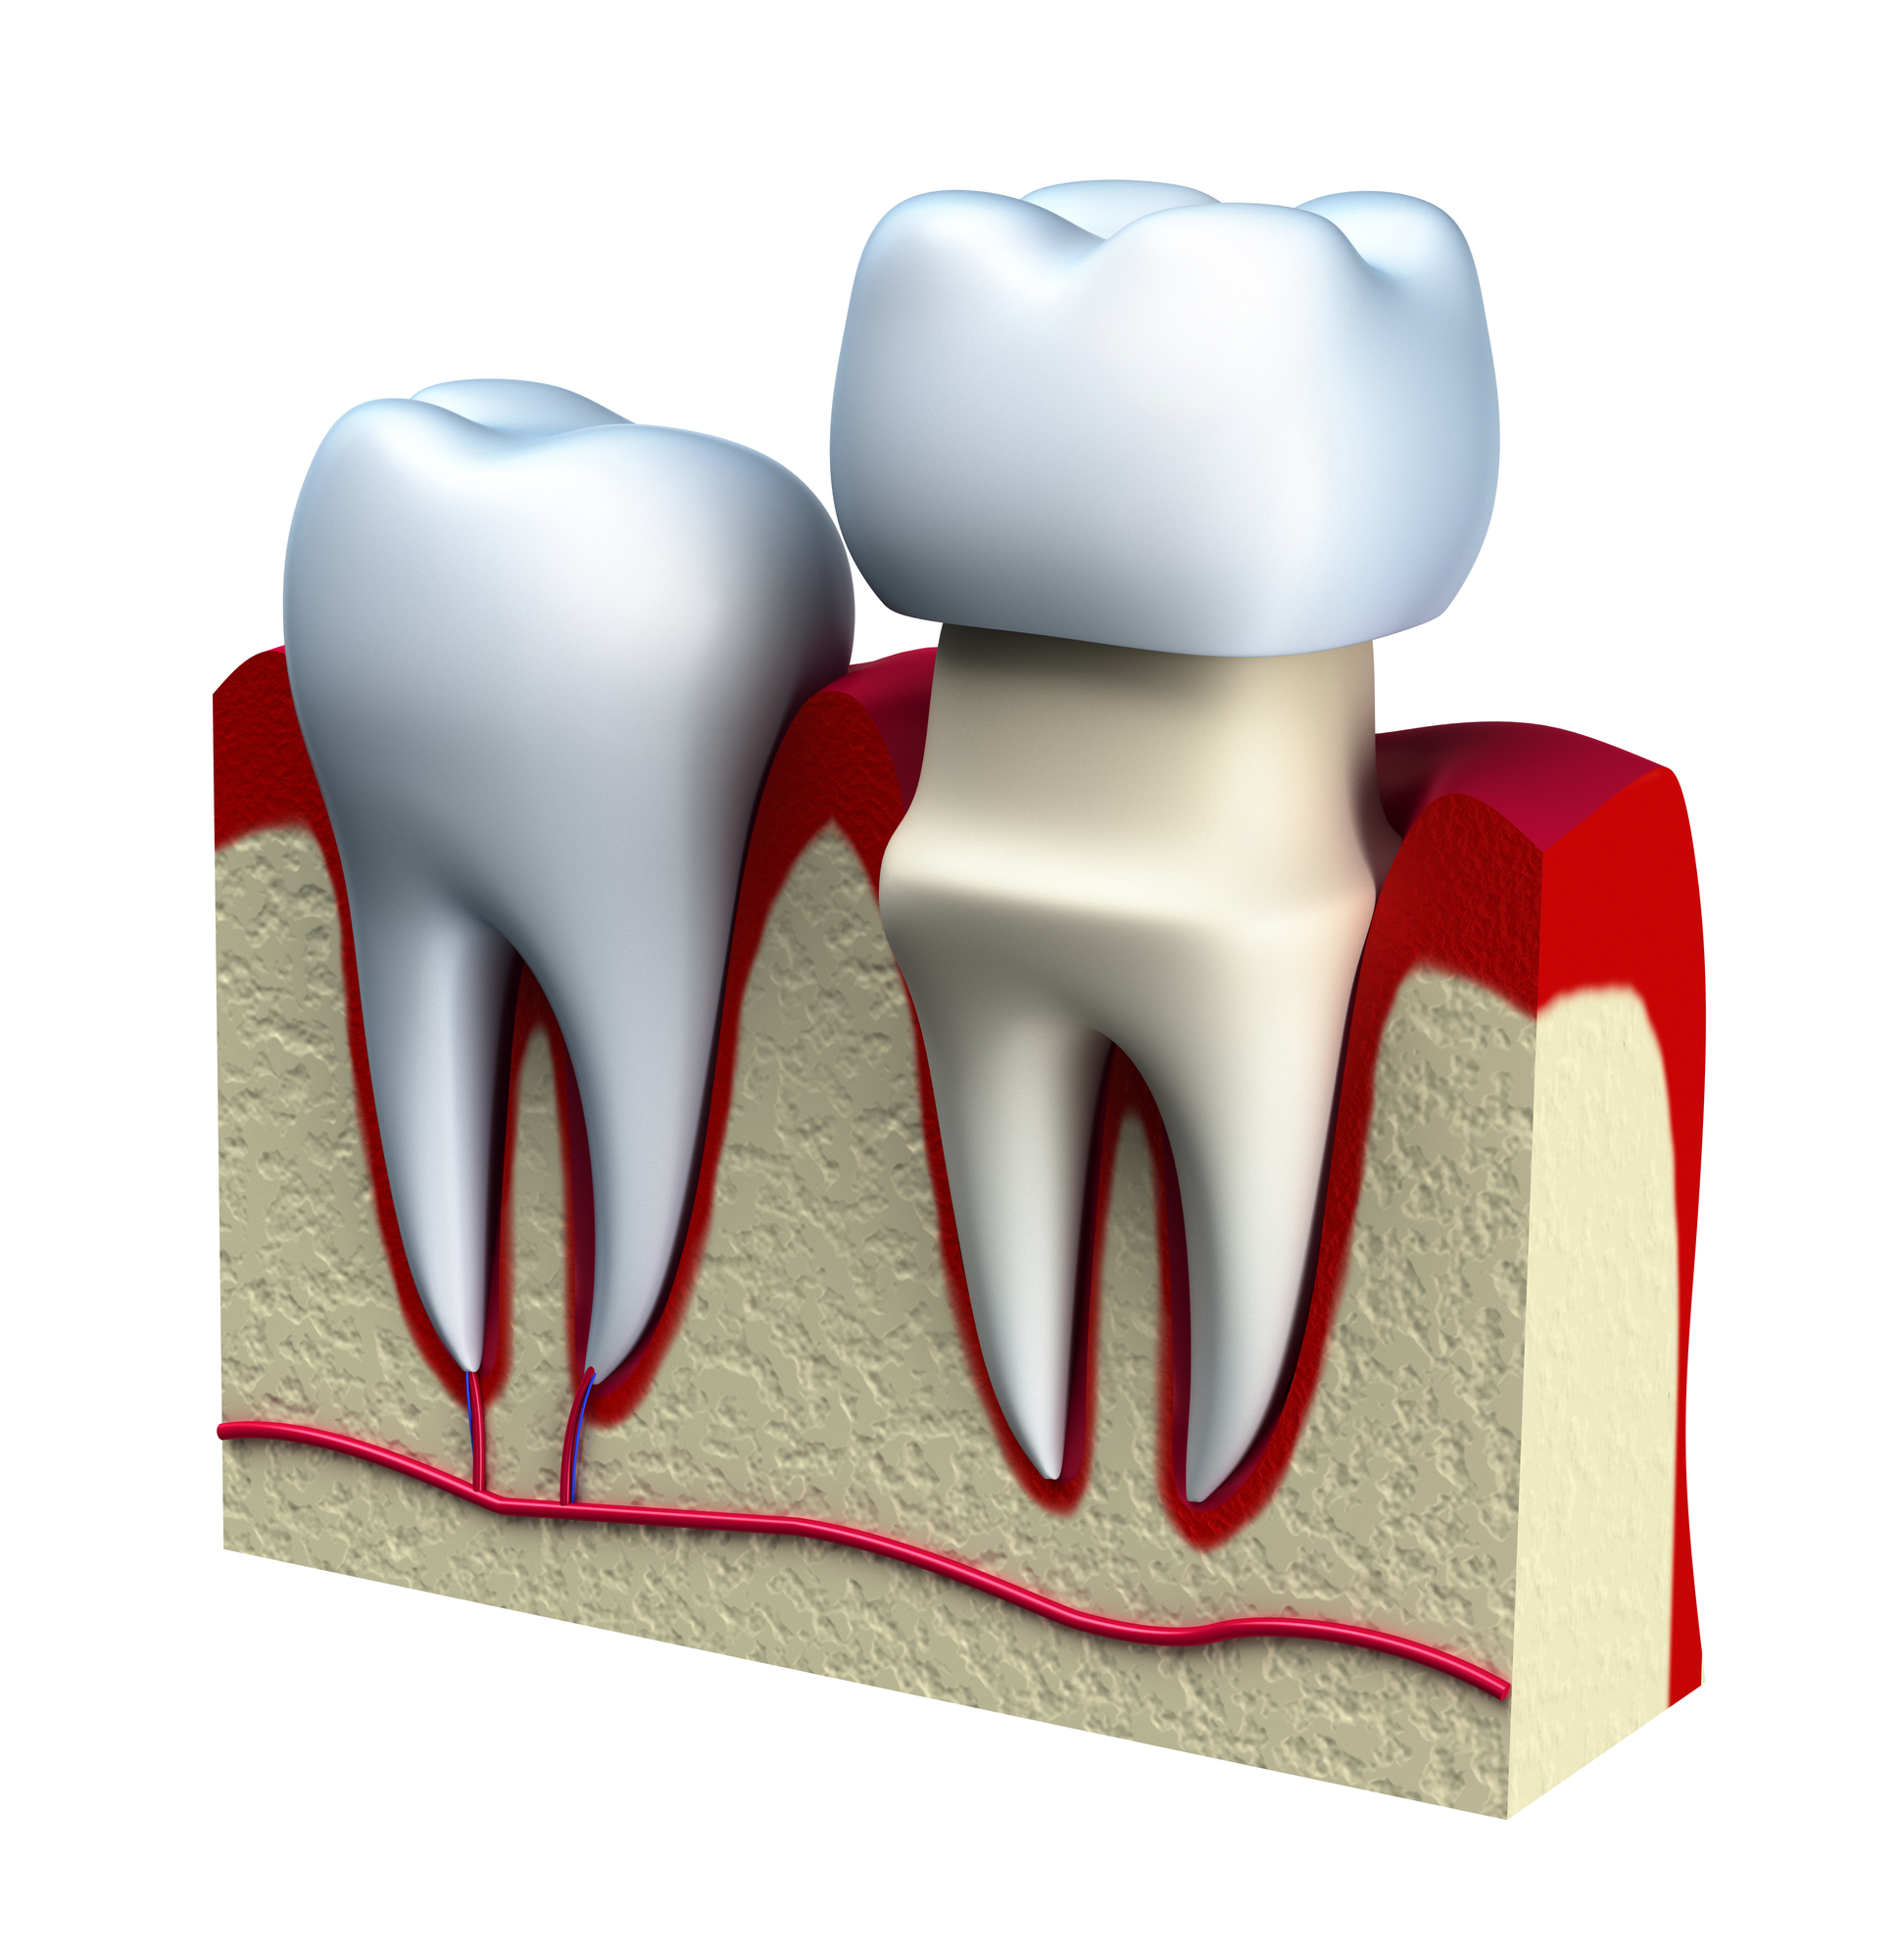 3D illustration of how dental crowns are placed on the teeth.